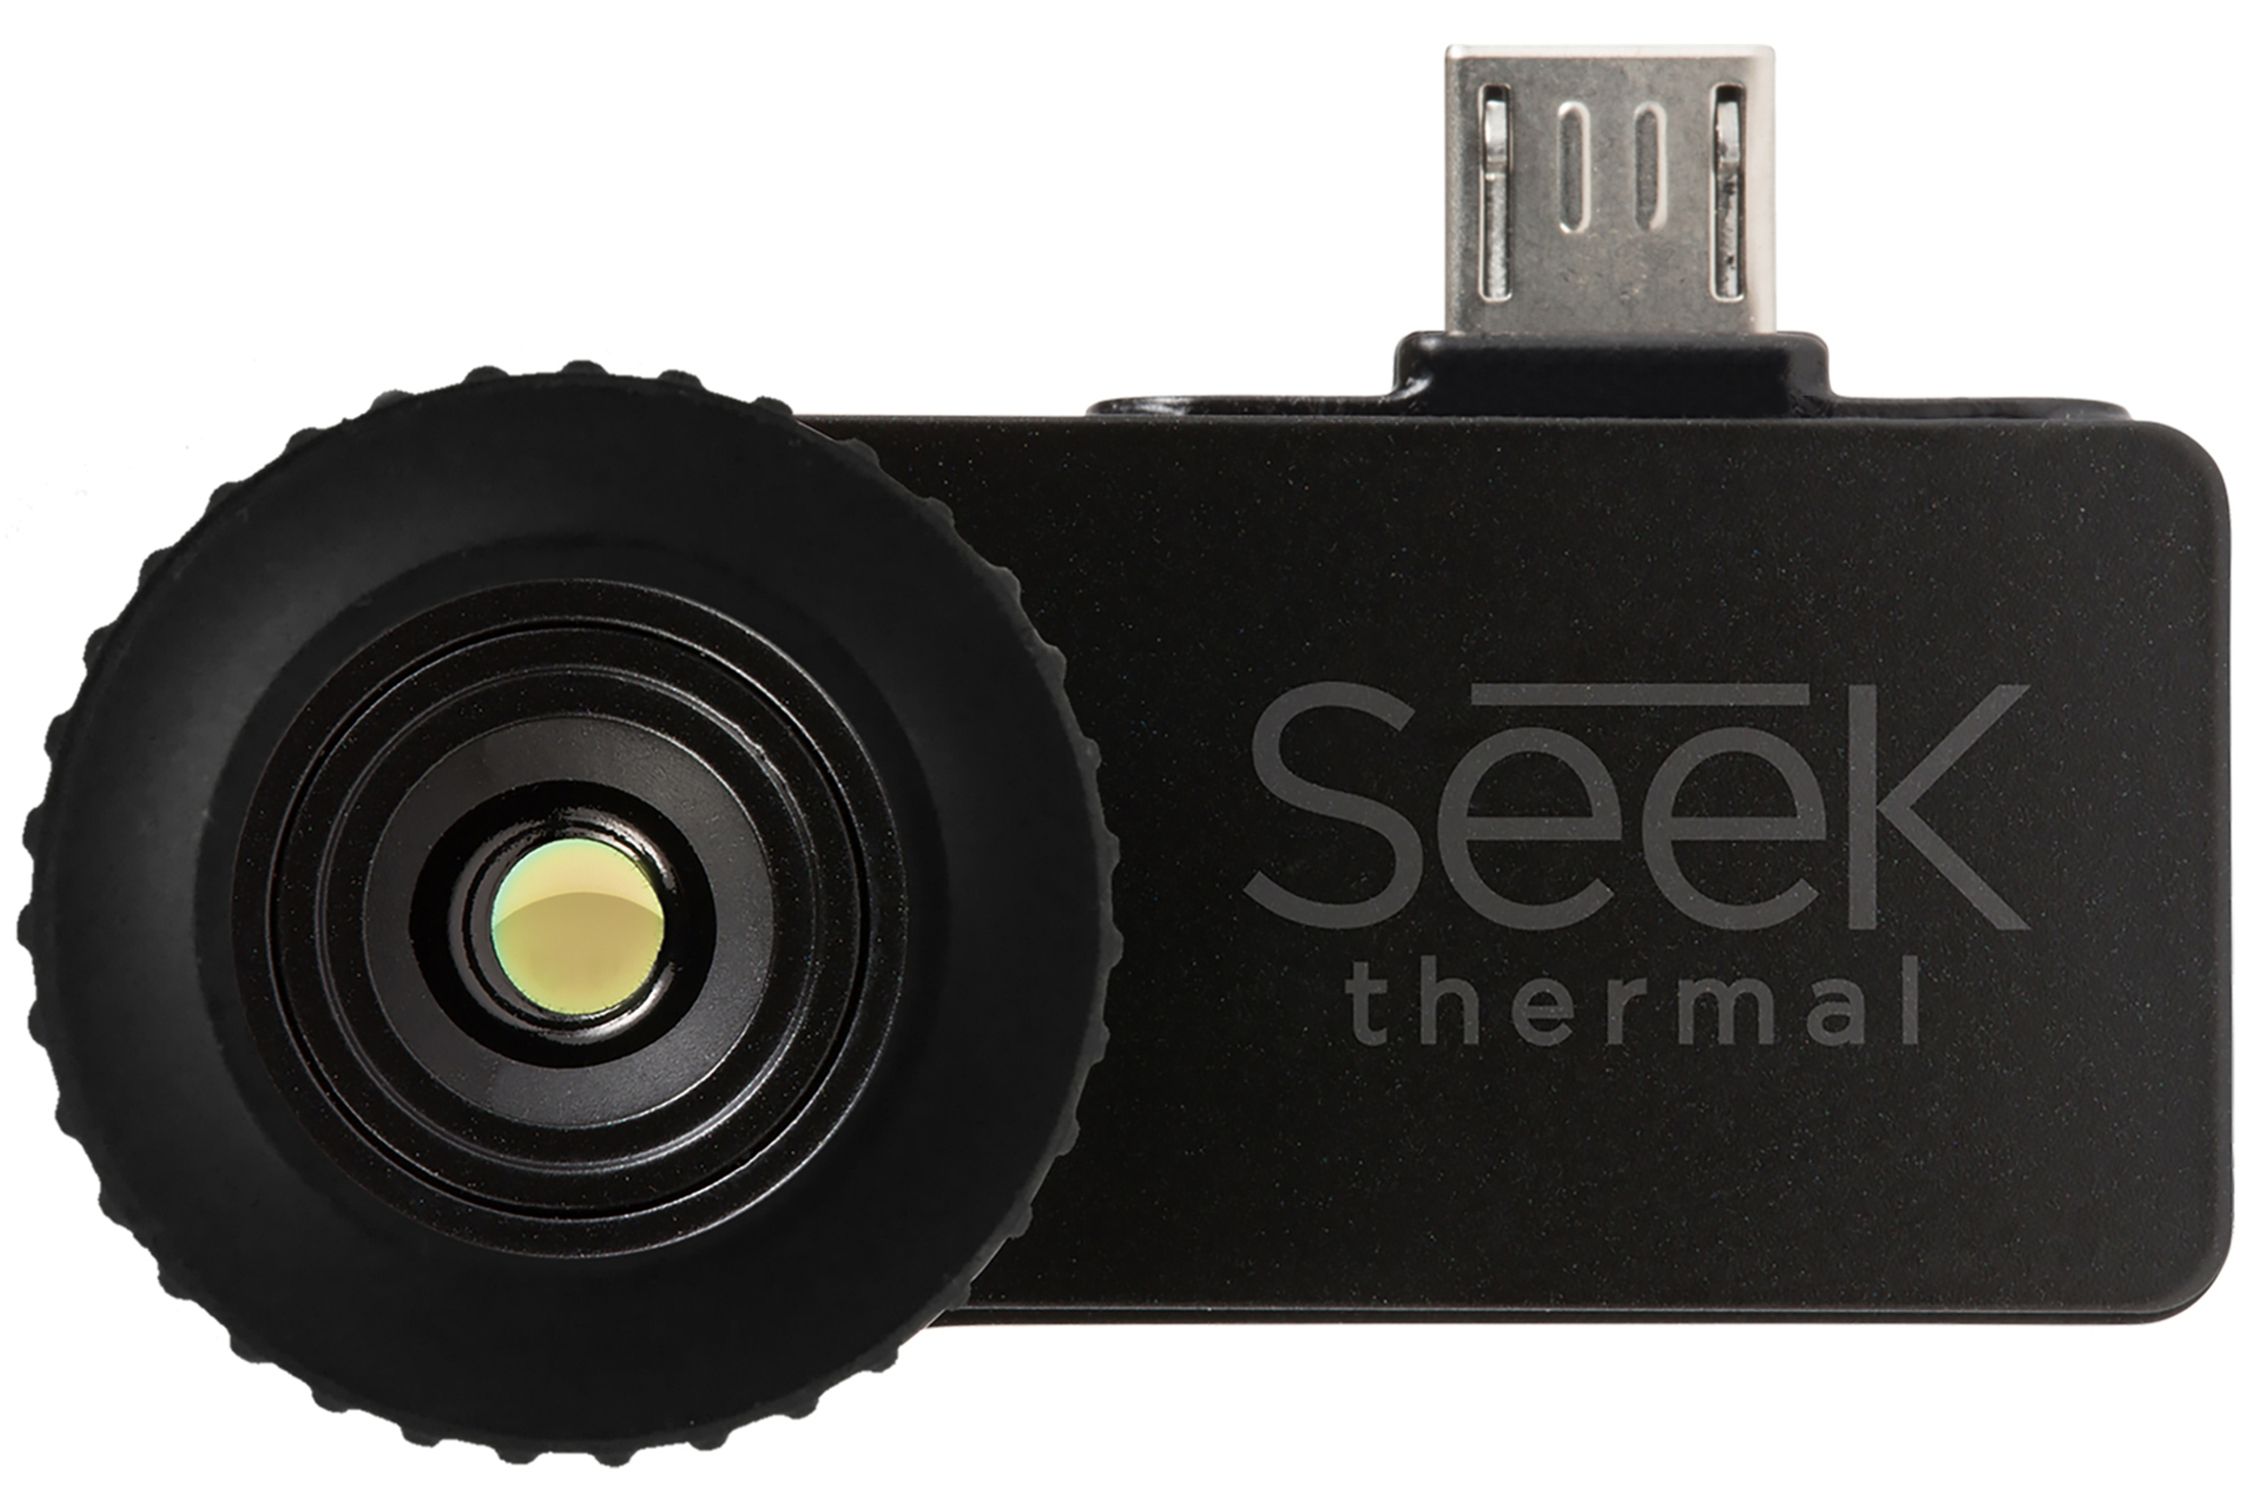 Seek Thermal Compact Android micro USB Thermal imaging camera UW-EAA_1